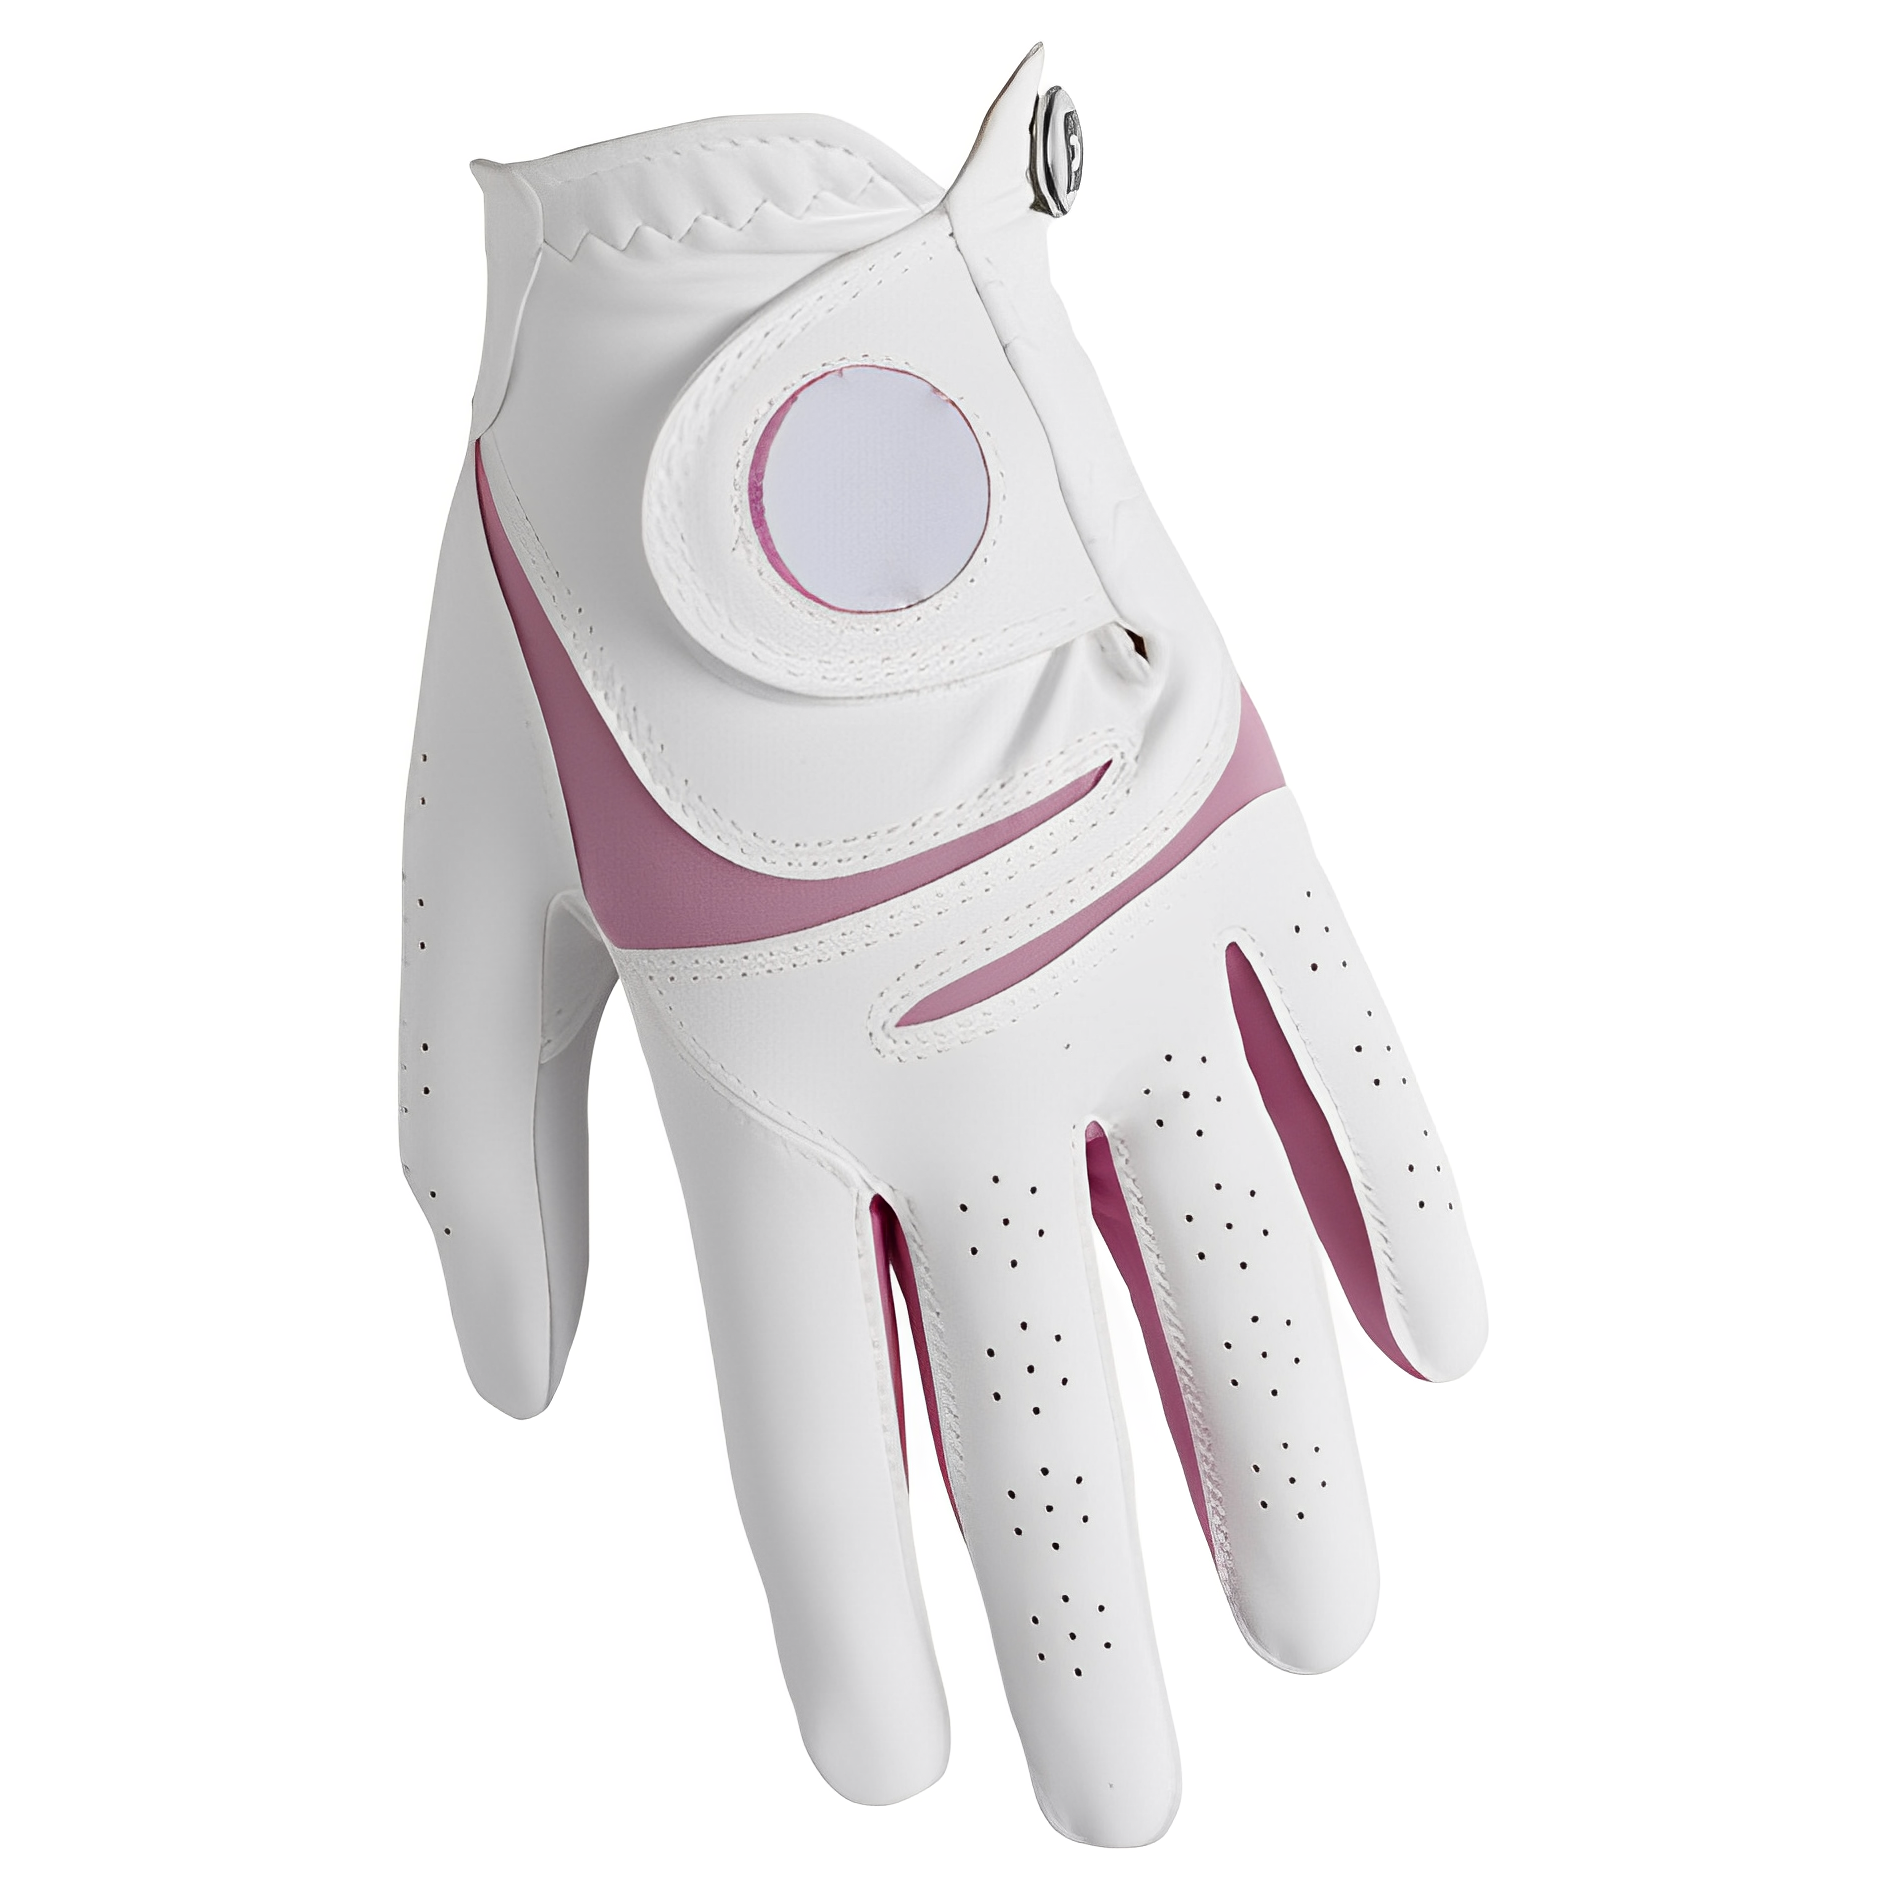 Claw Golf Glove for Men - Breathable, Long Lasting-1986 GOLF